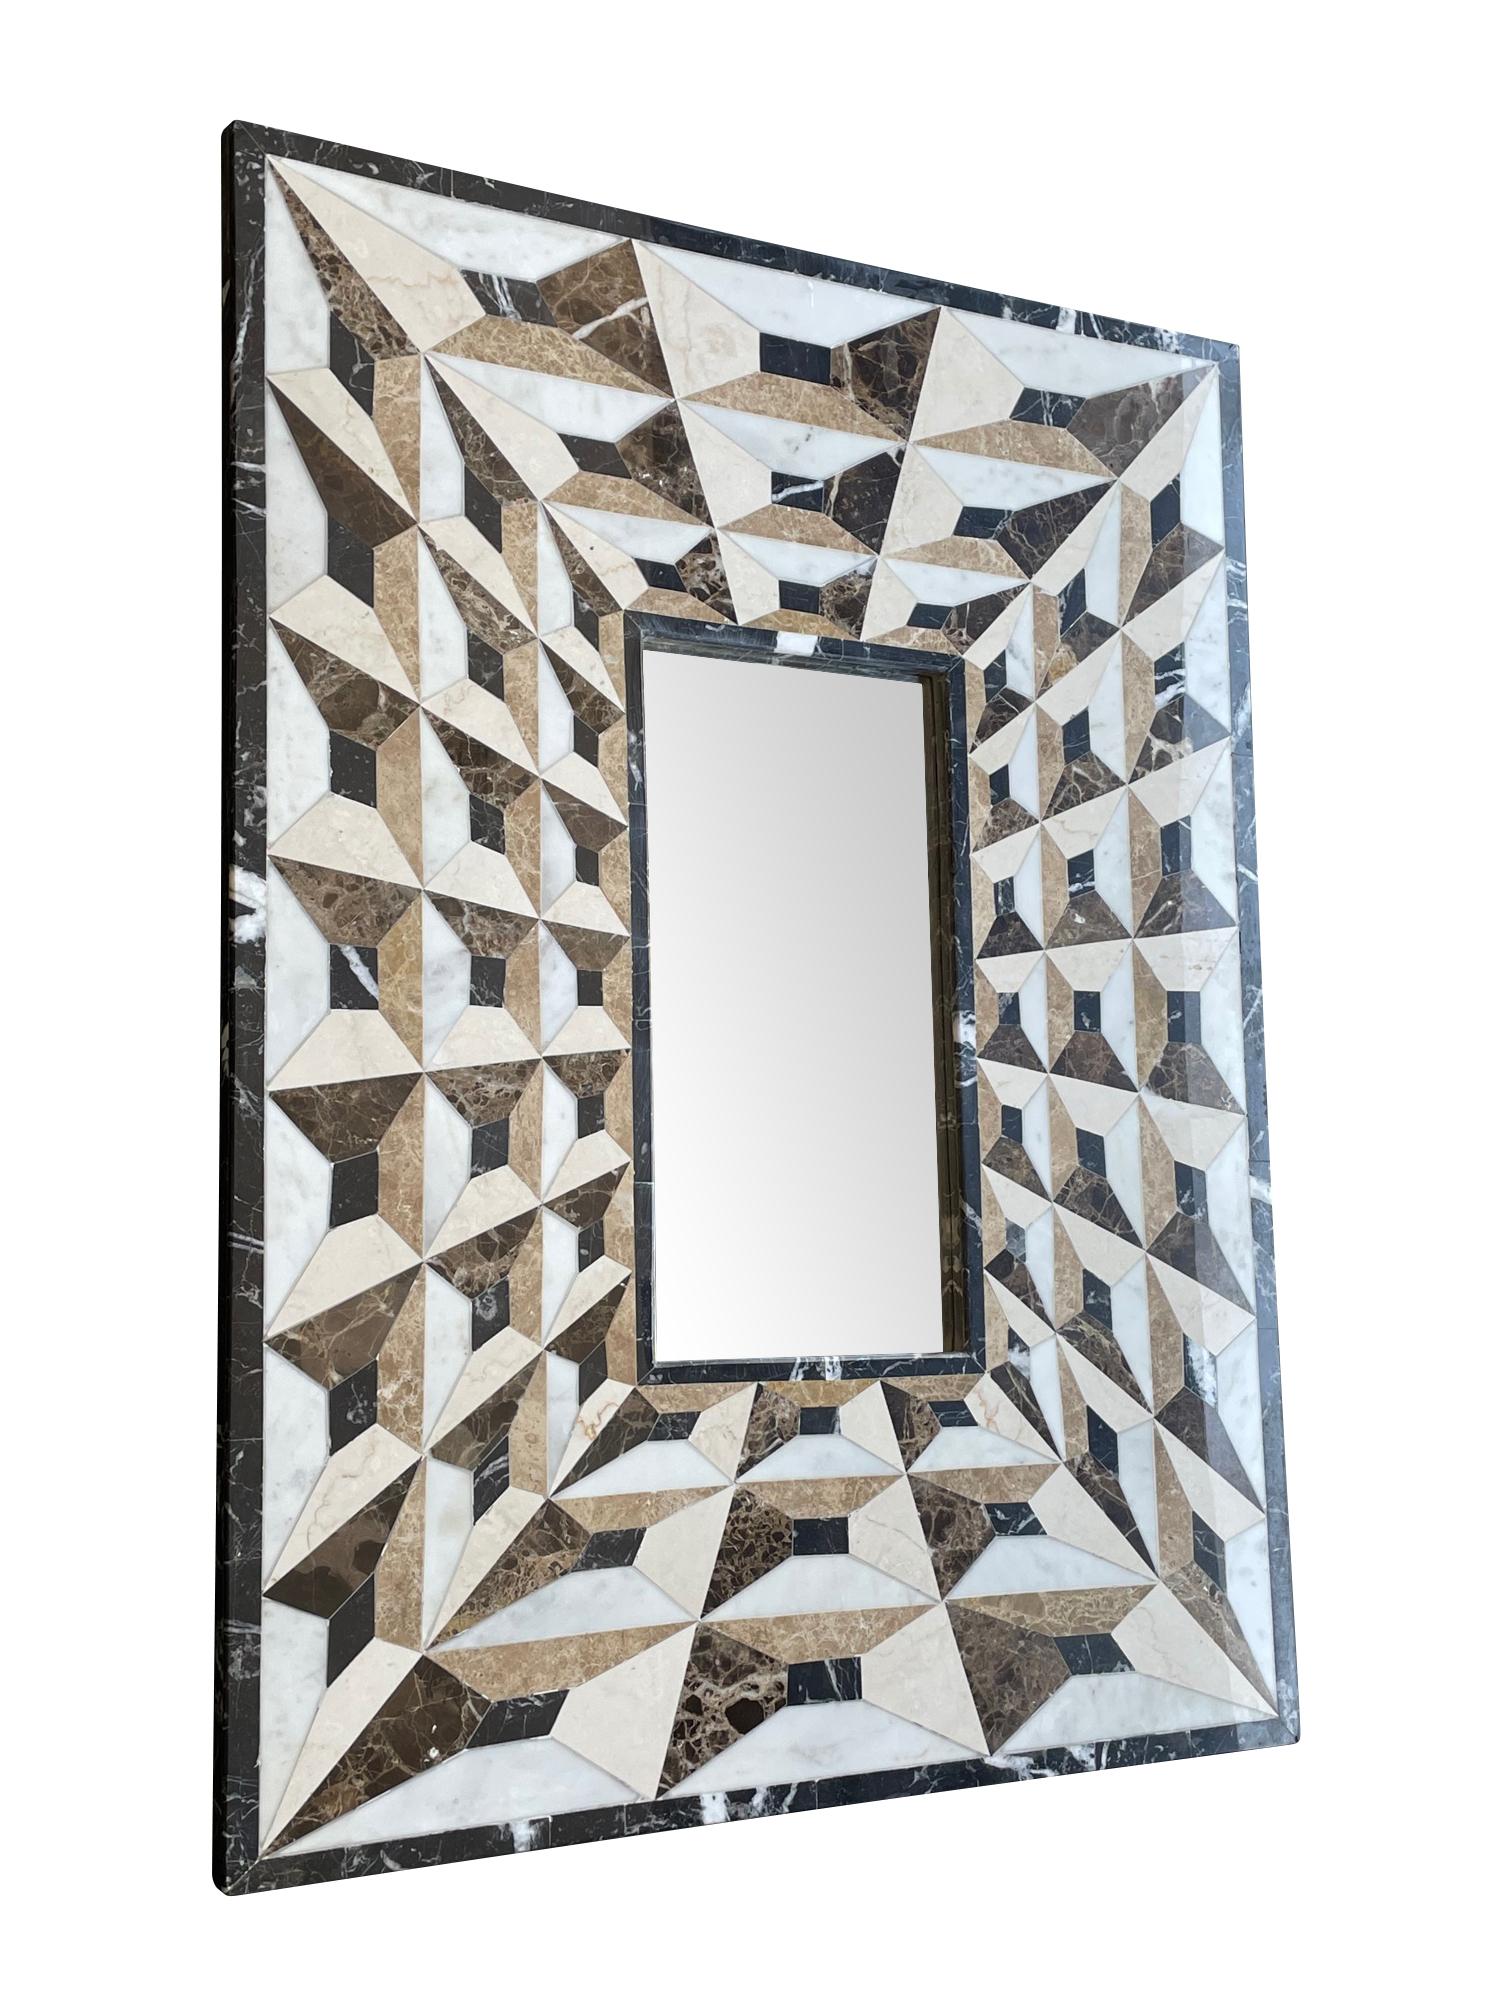 Mid-20th Century Art Deco Mirror with Tessellated Marble Surround Creating Optical Perspective